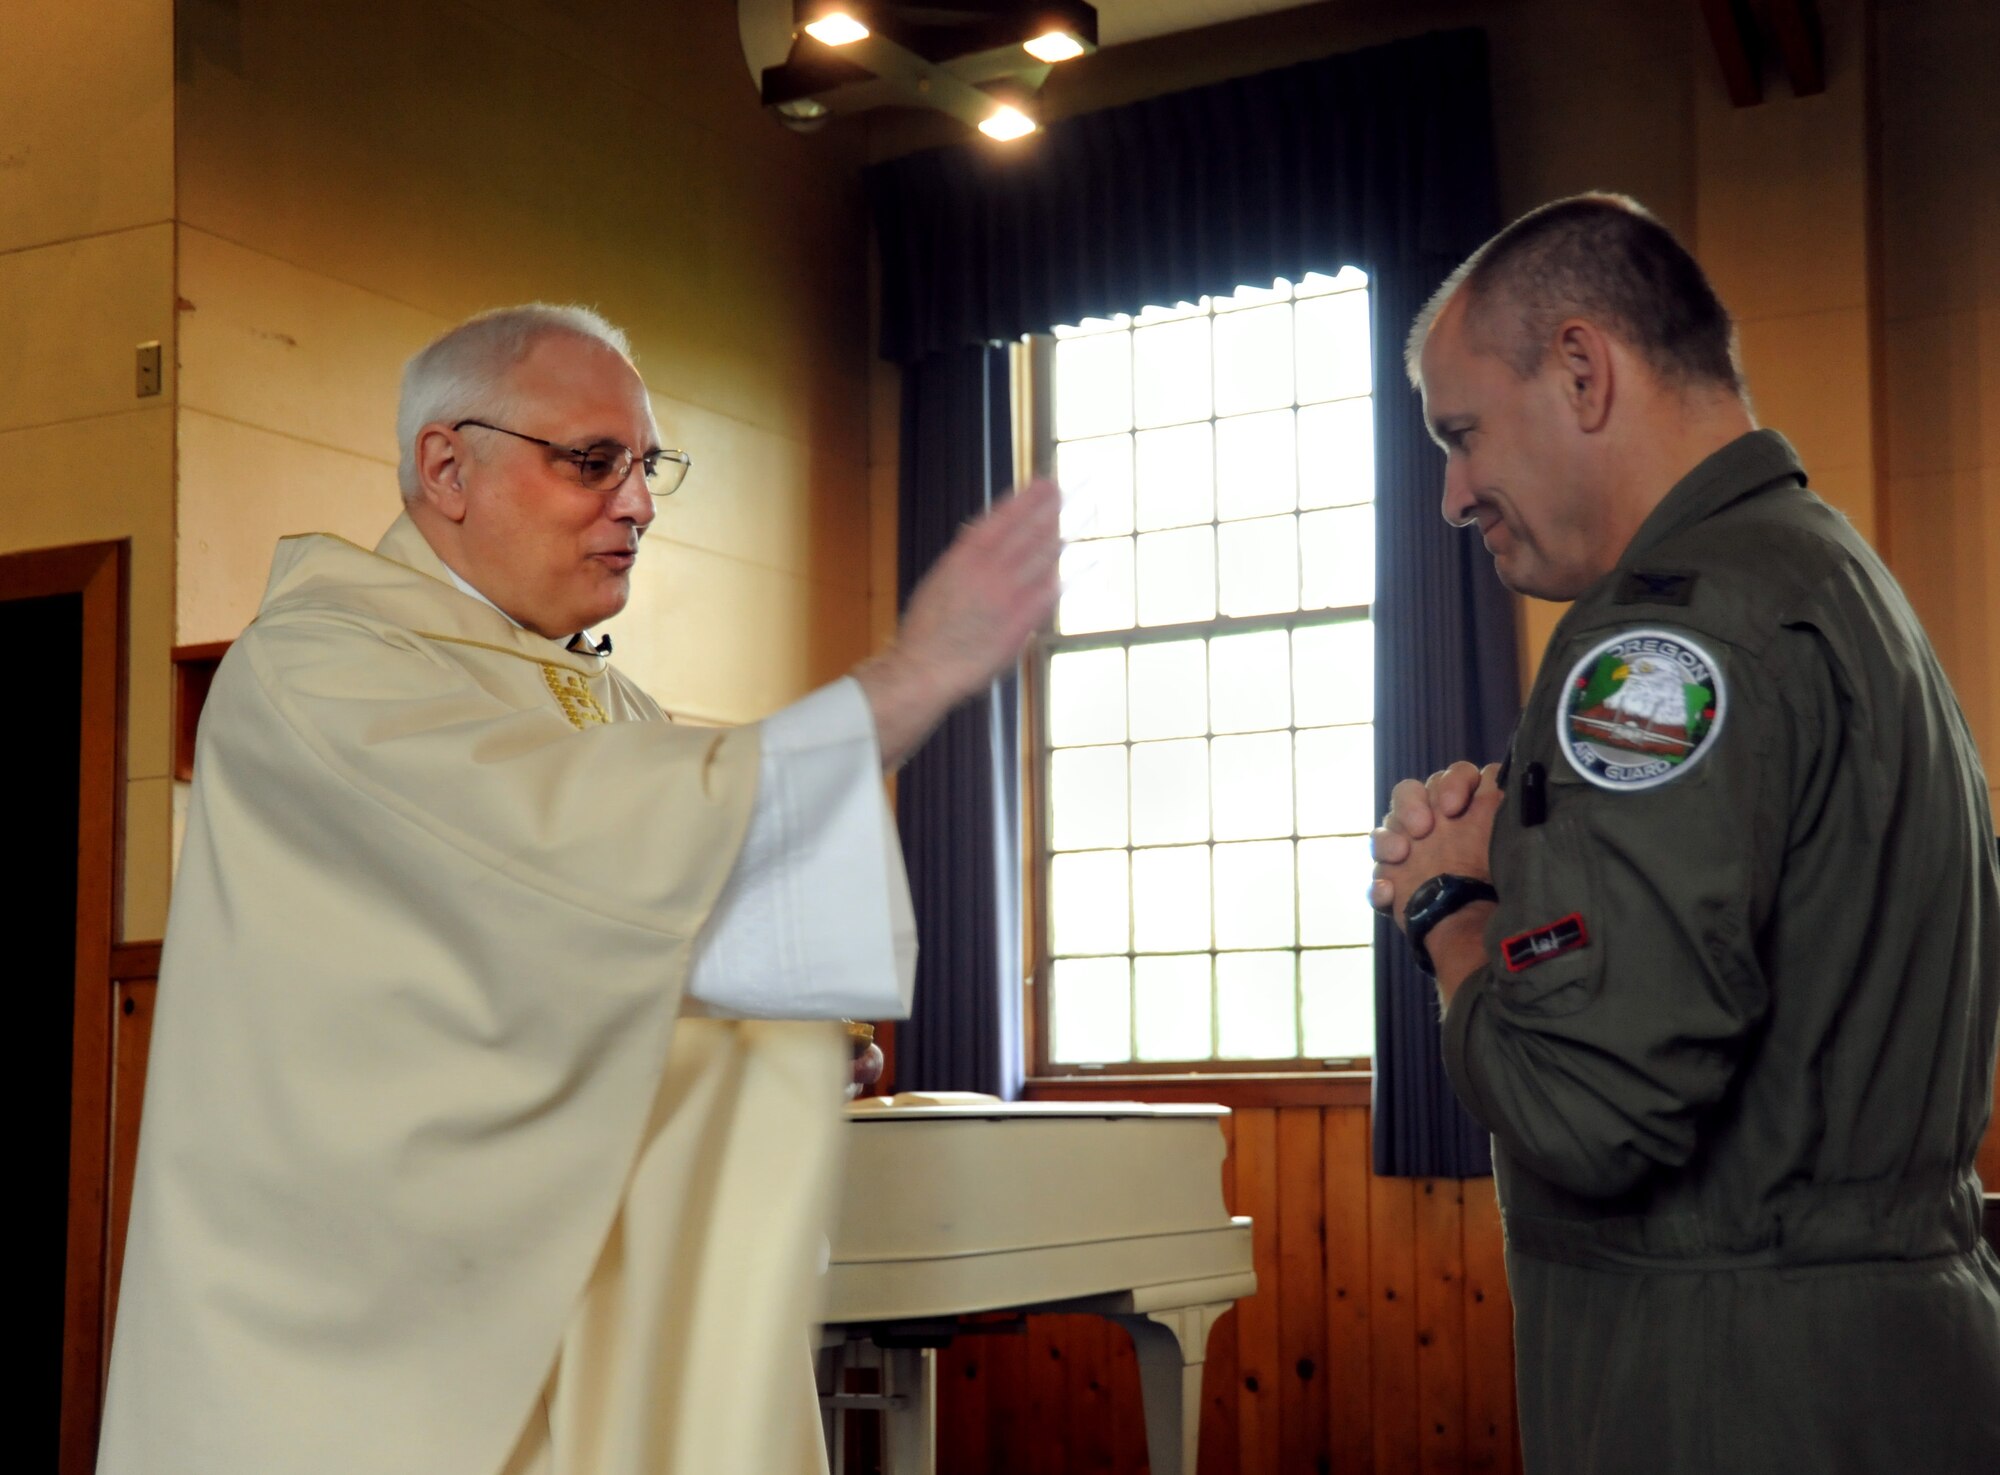 U.S. Air Force Lt. Col. Rick Sirianni gives a blessing to Col. Michael Bieniewicz, 142nd Fighter Wing Vice- Commander, during mass held on May 15, 2011 at the Portland Air National Guard Base, Portland, Ore., during the 142nd Fighter Wing Unit Training Assembly. This was Father Sirianni's last mass before he retires from the Oregon Air National Guard after 23 years of service. (U.S. Air Force photograph by Tech. Sgt. John Hughel) (Released)